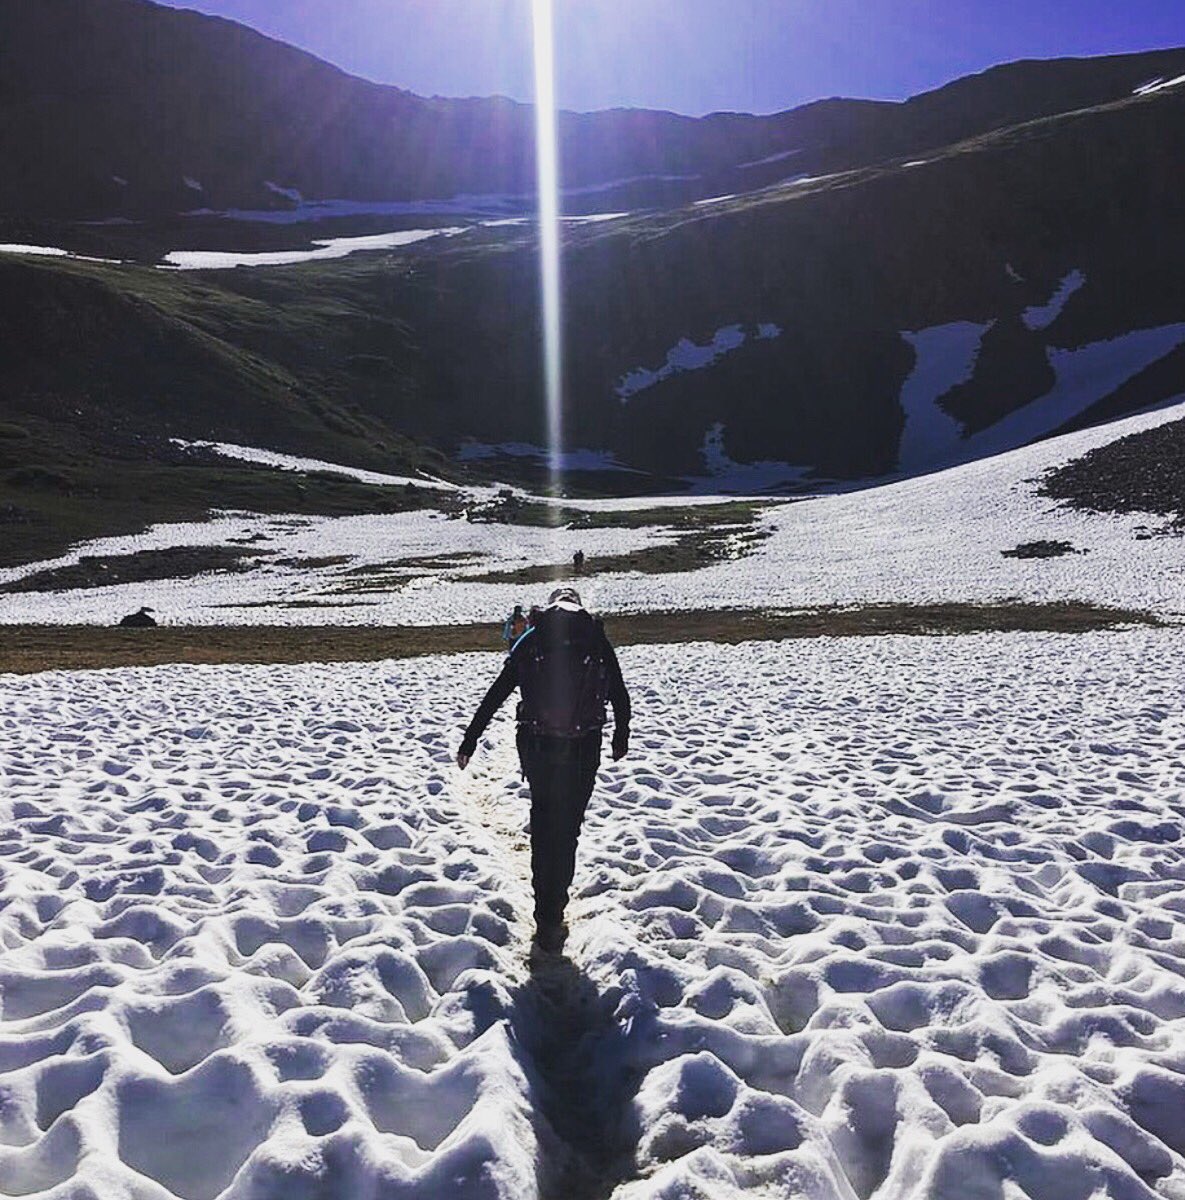 Crossing the snow field in the valley just below the final push for the summit of Huron Peak, summer of 2017. #snowfield #14ers #14ersofcolorado #colorado14ers #viewcolorado #coloradolove #coloradolife #mountainclimbing #14erlove #intothesun #14erphotography #summitfever